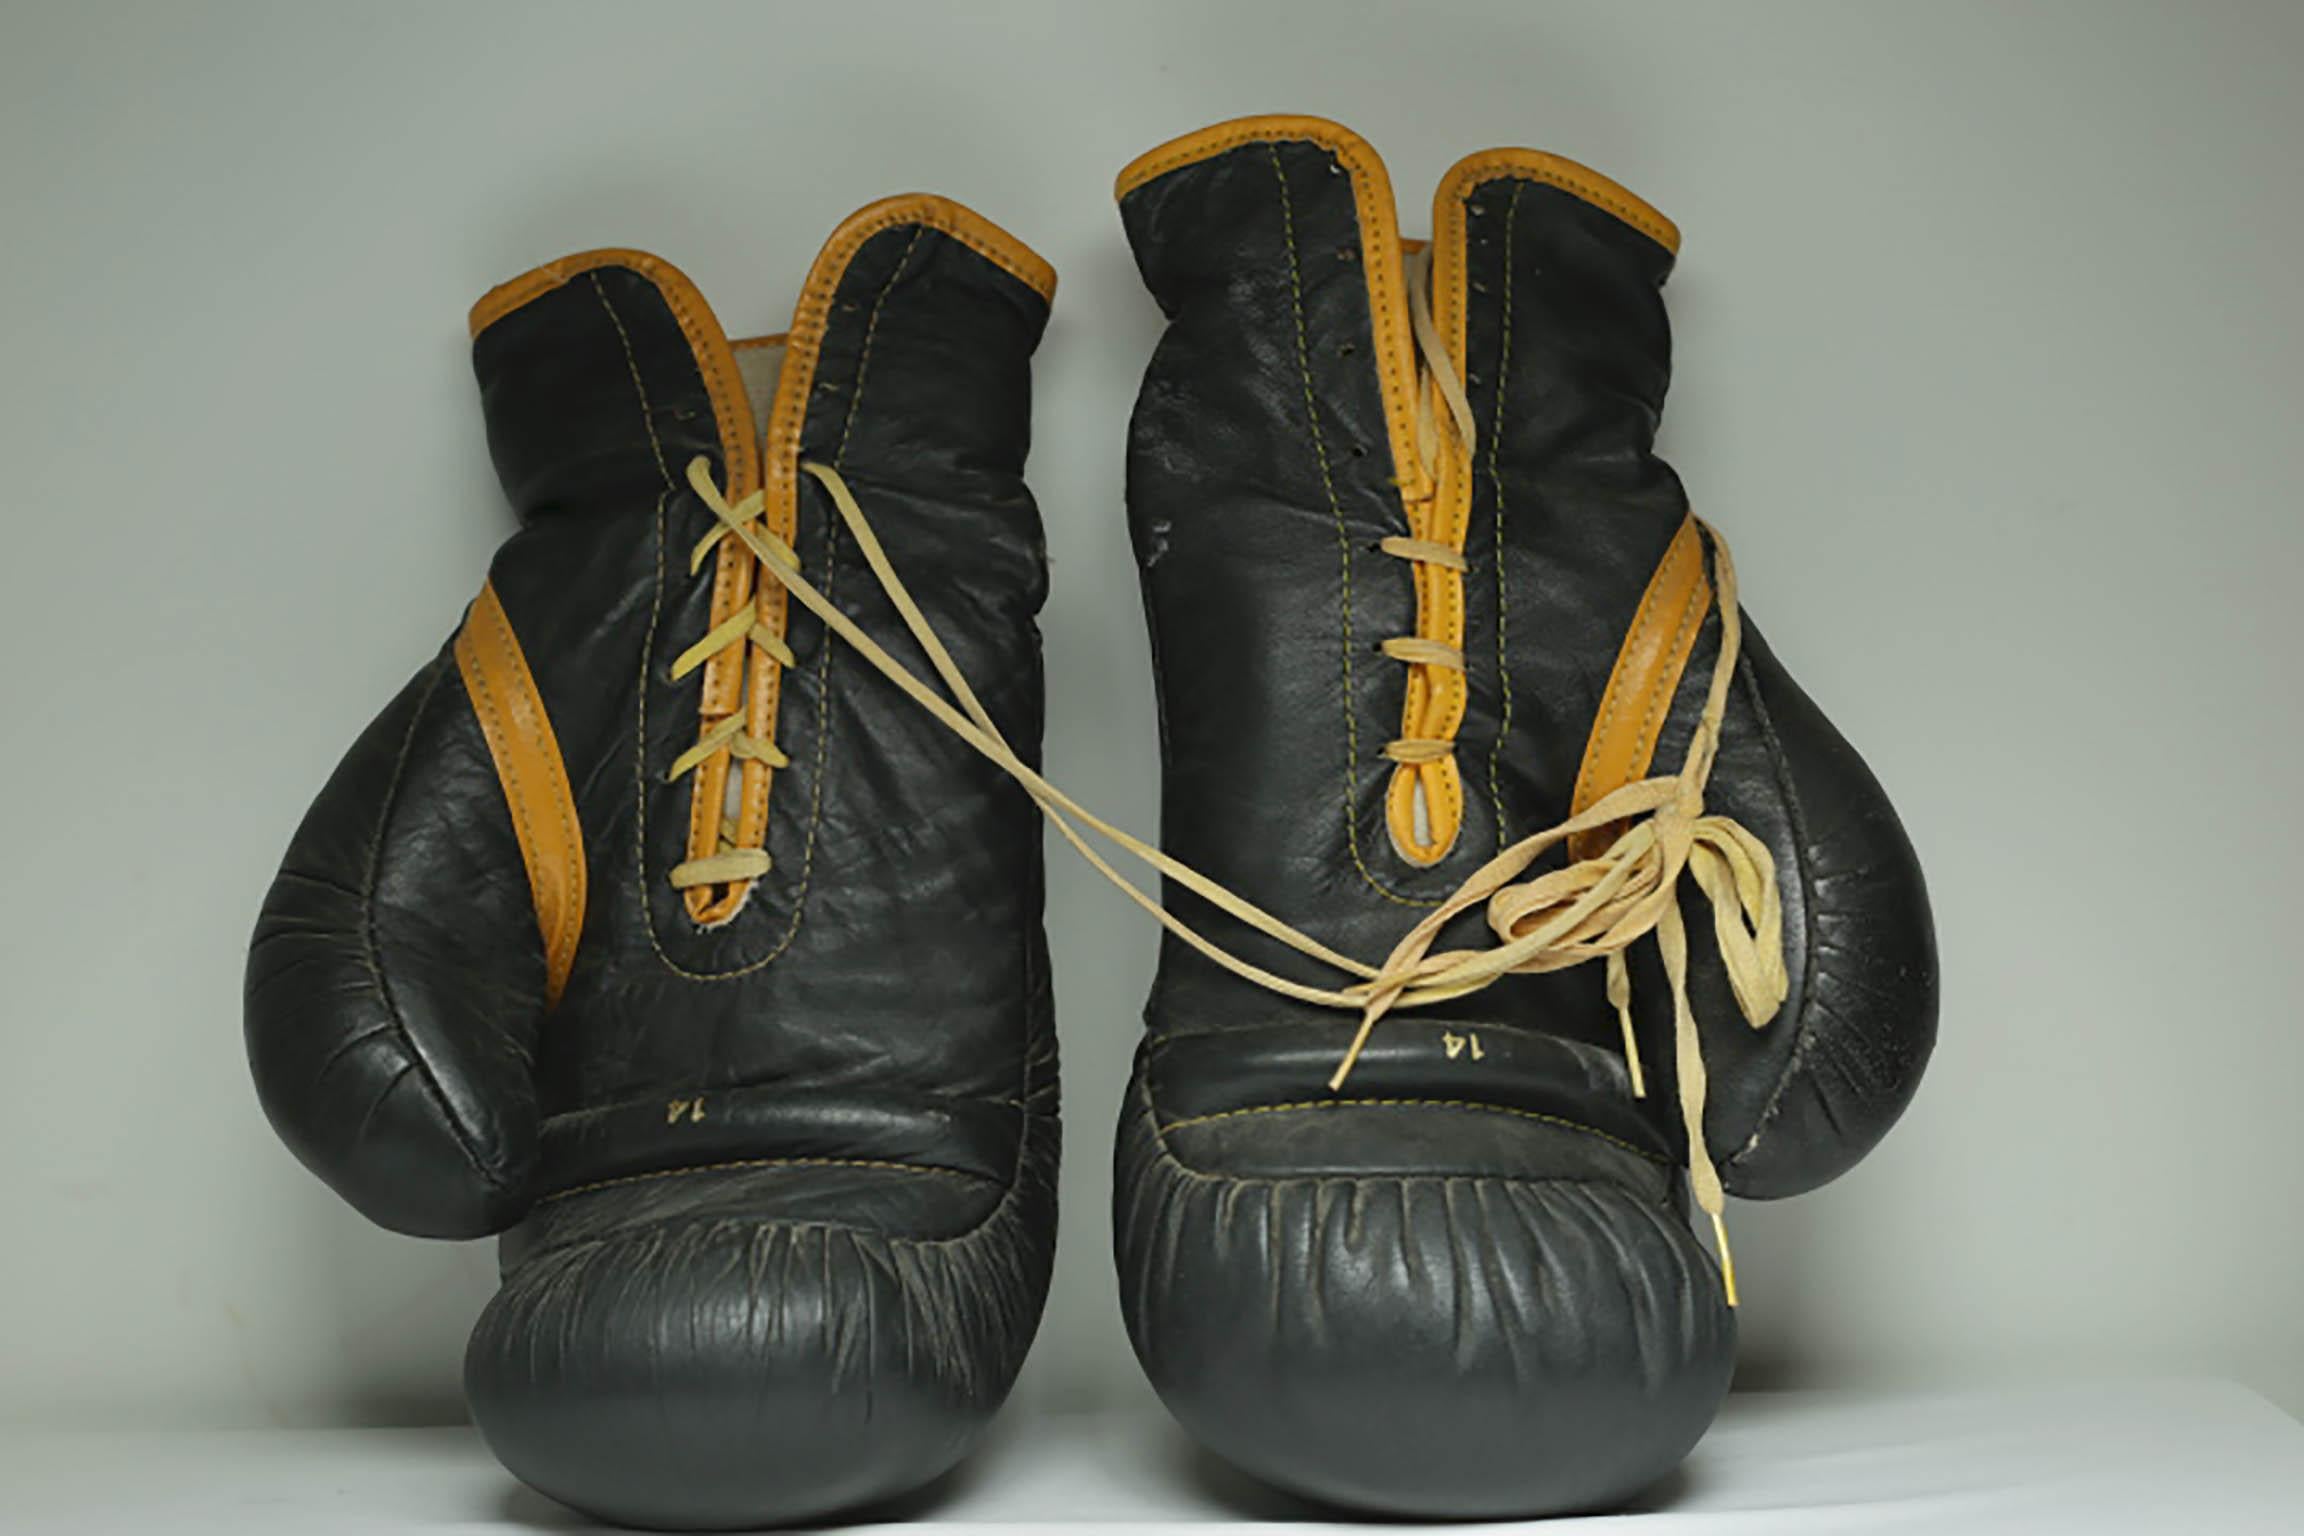 Pair of leather boxing gloves with original string. Great to hang on a hook or drap over a chair.